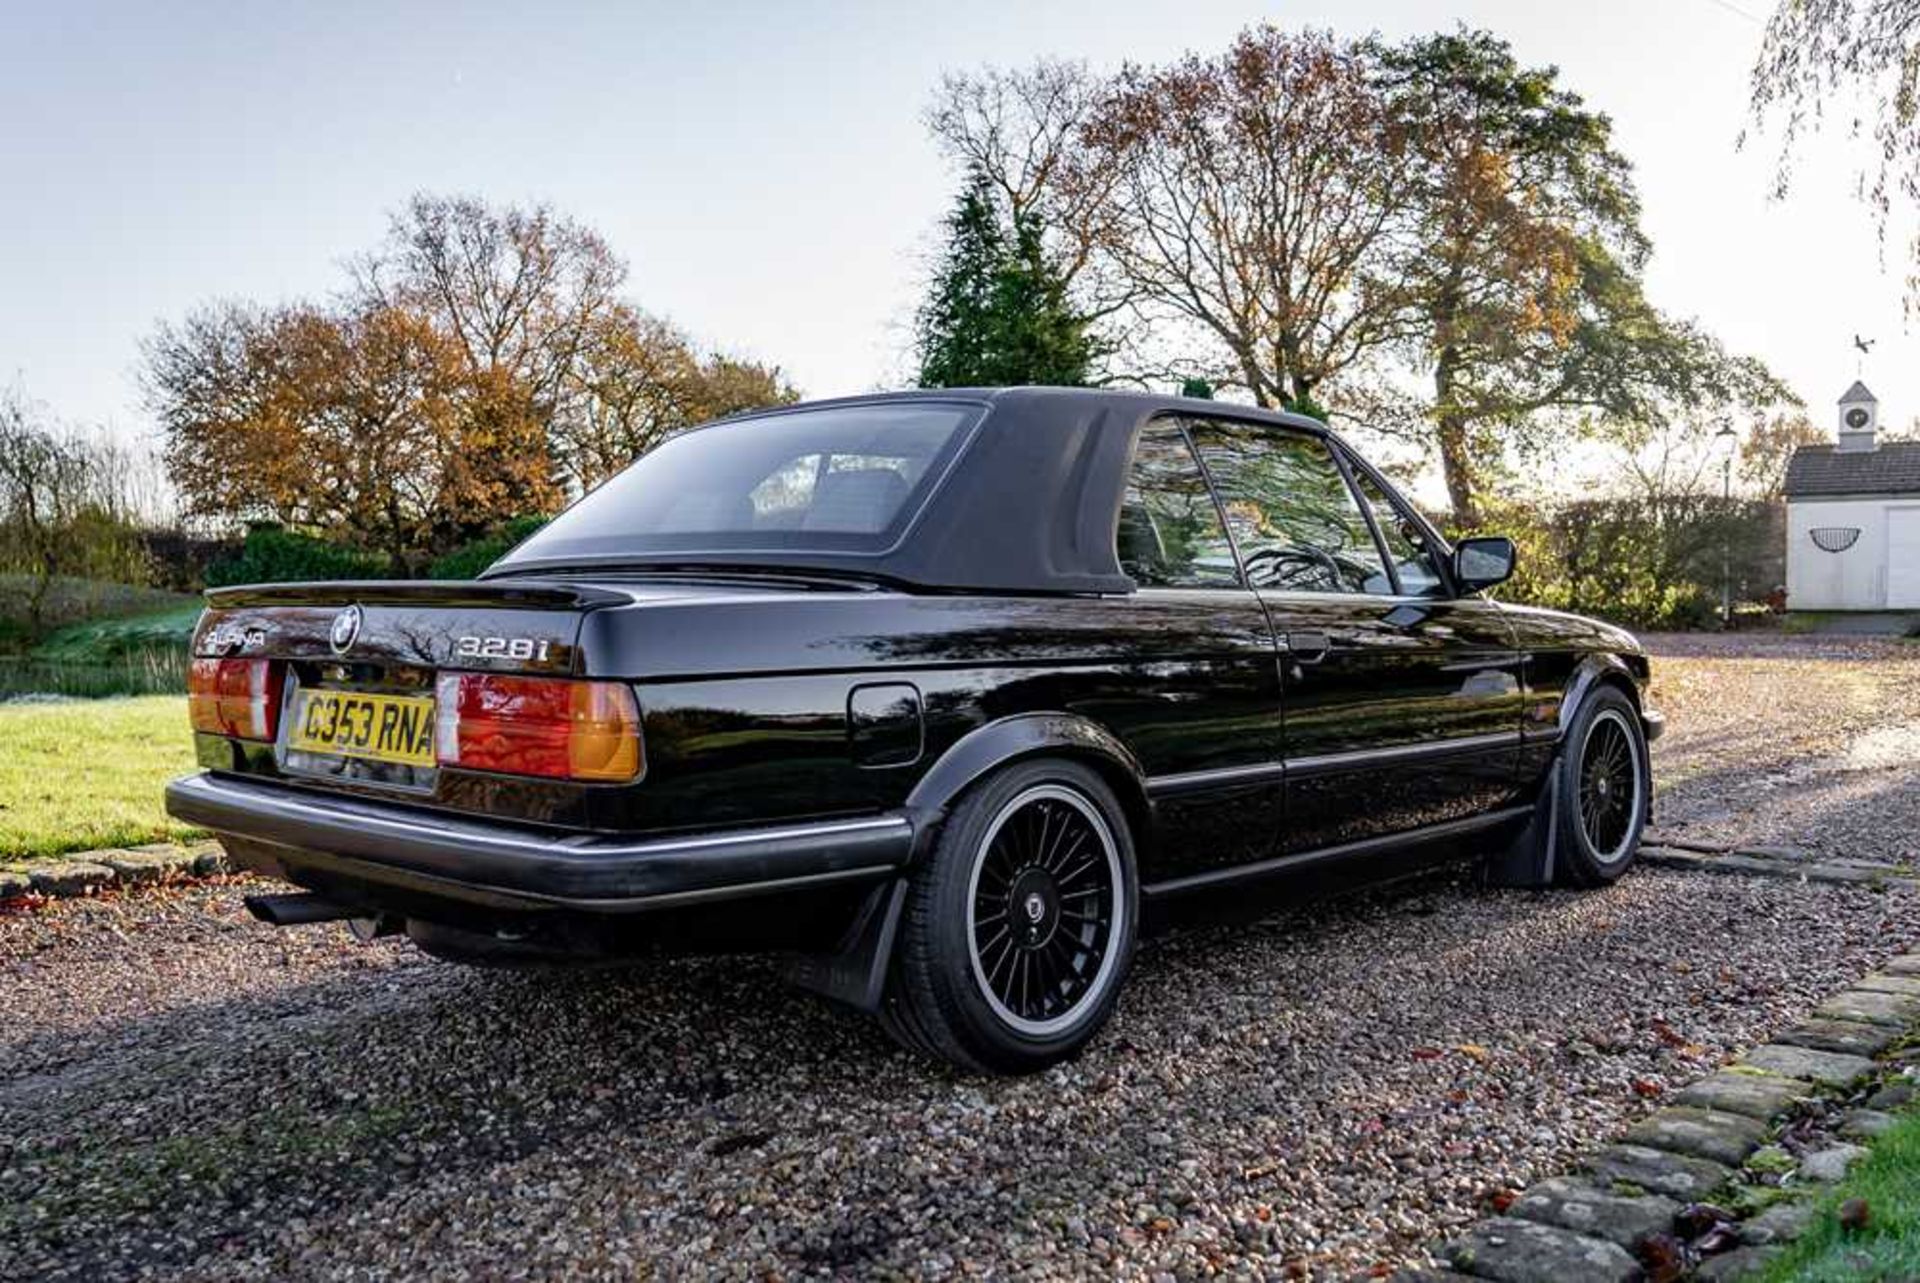 1989 BMW 320i Convertible Converted to Alpina 328i Specification - Image 15 of 51